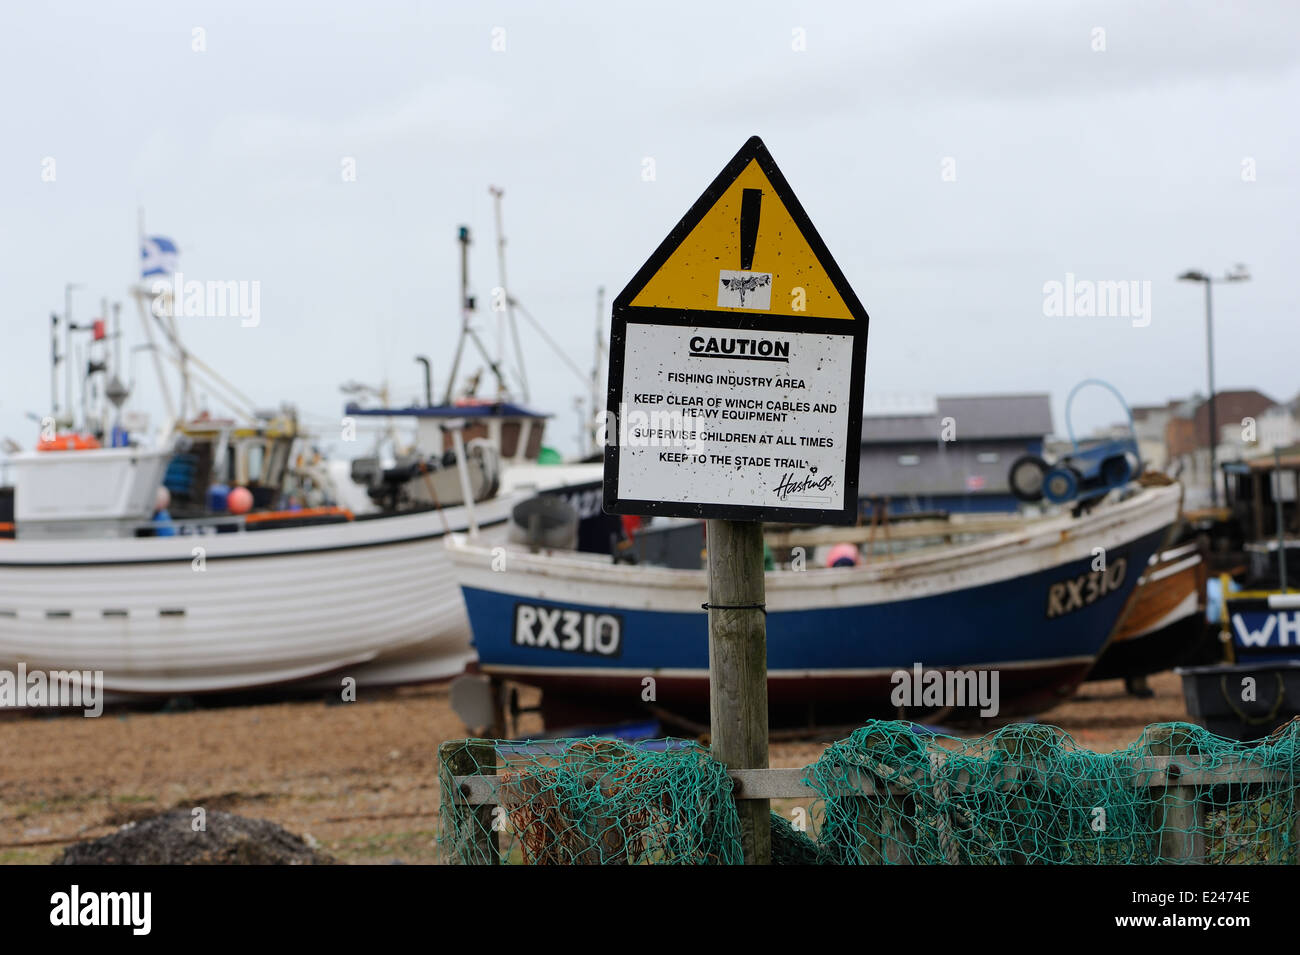 A warning sign by fishing boats in Hastings warning people to take care in a Fishing Industry Area. Hastings, Sussex, UK. 0 Stock Photo